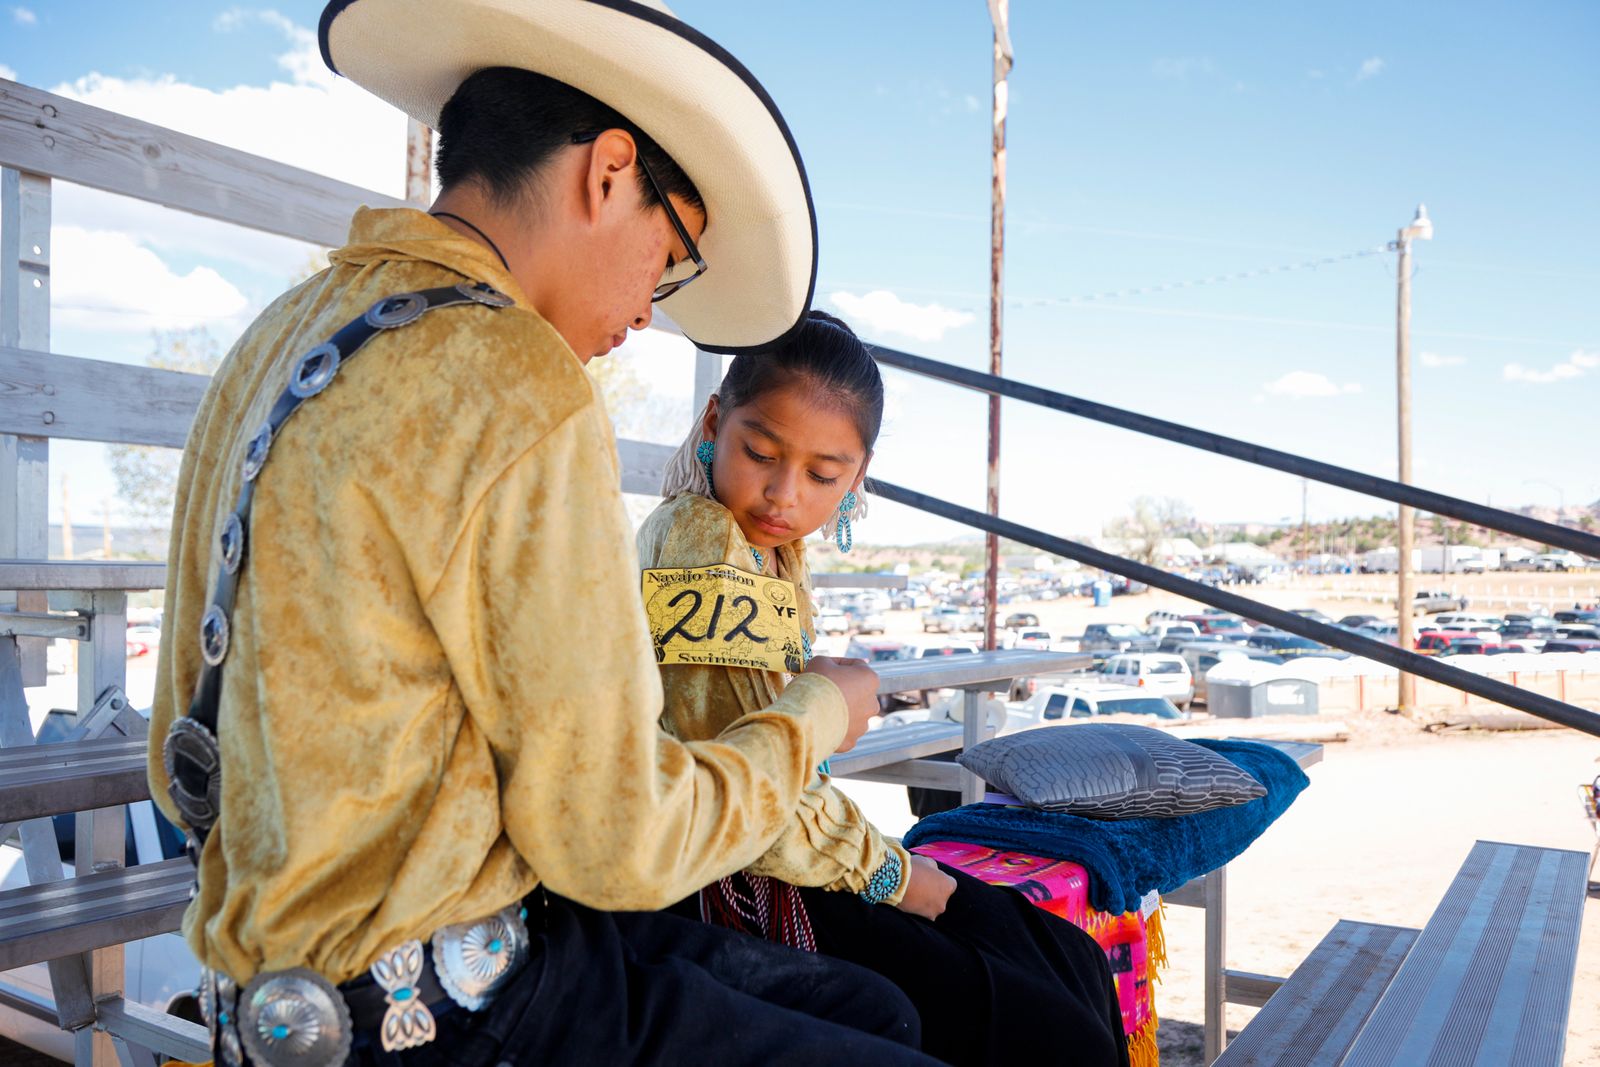 © Julien McRoberts - Image from the A Place of Joy - Navajo Nation Fair photography project